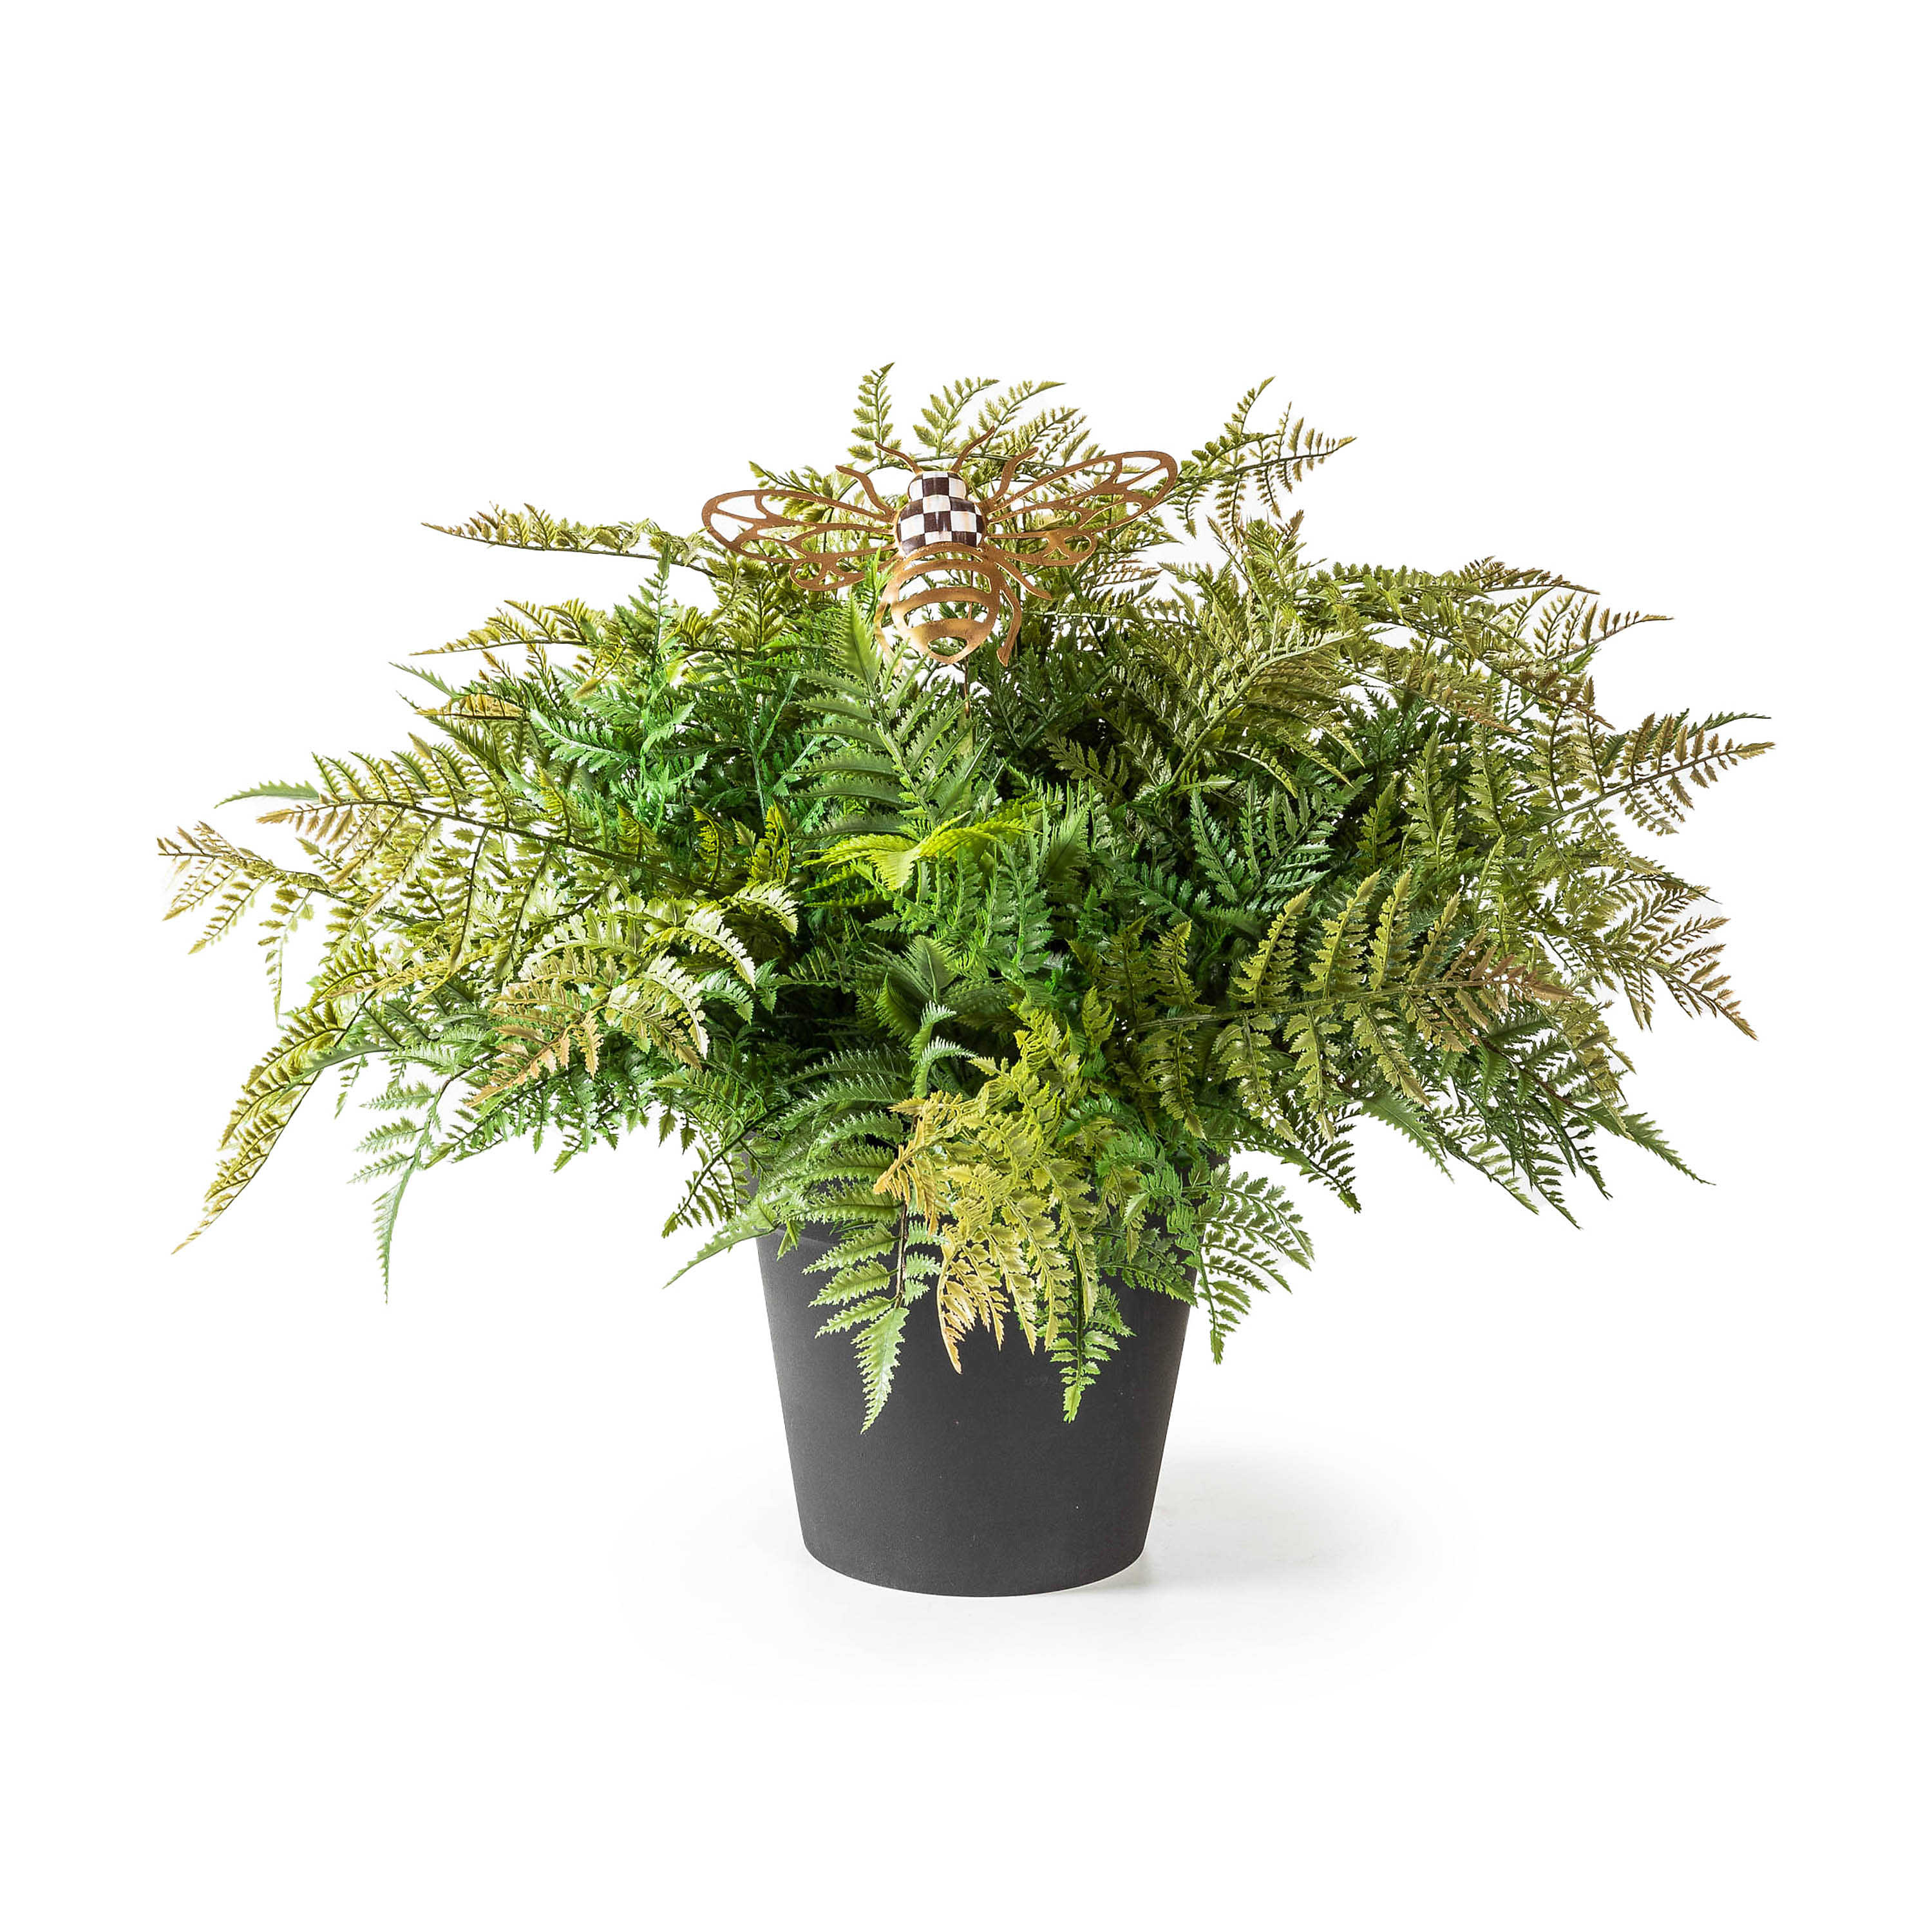 Potted Large Fern With Bee mackenzie-childs Panama 0